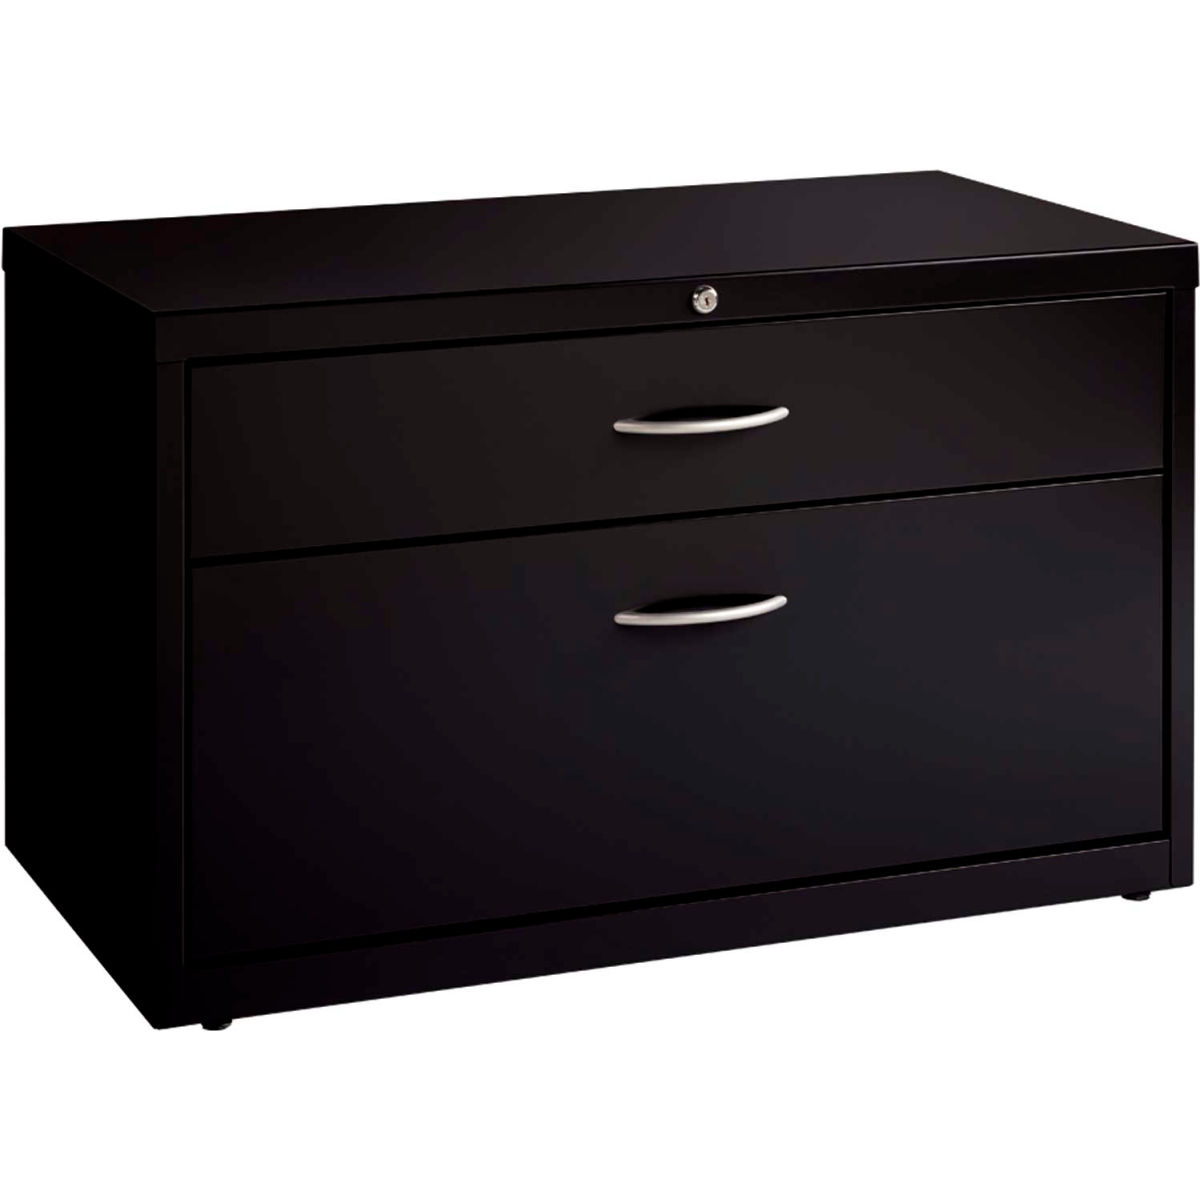 Picture of Hirsh Industries 695761 Interion 36 in. Low Credenza with File Cabinet - Black